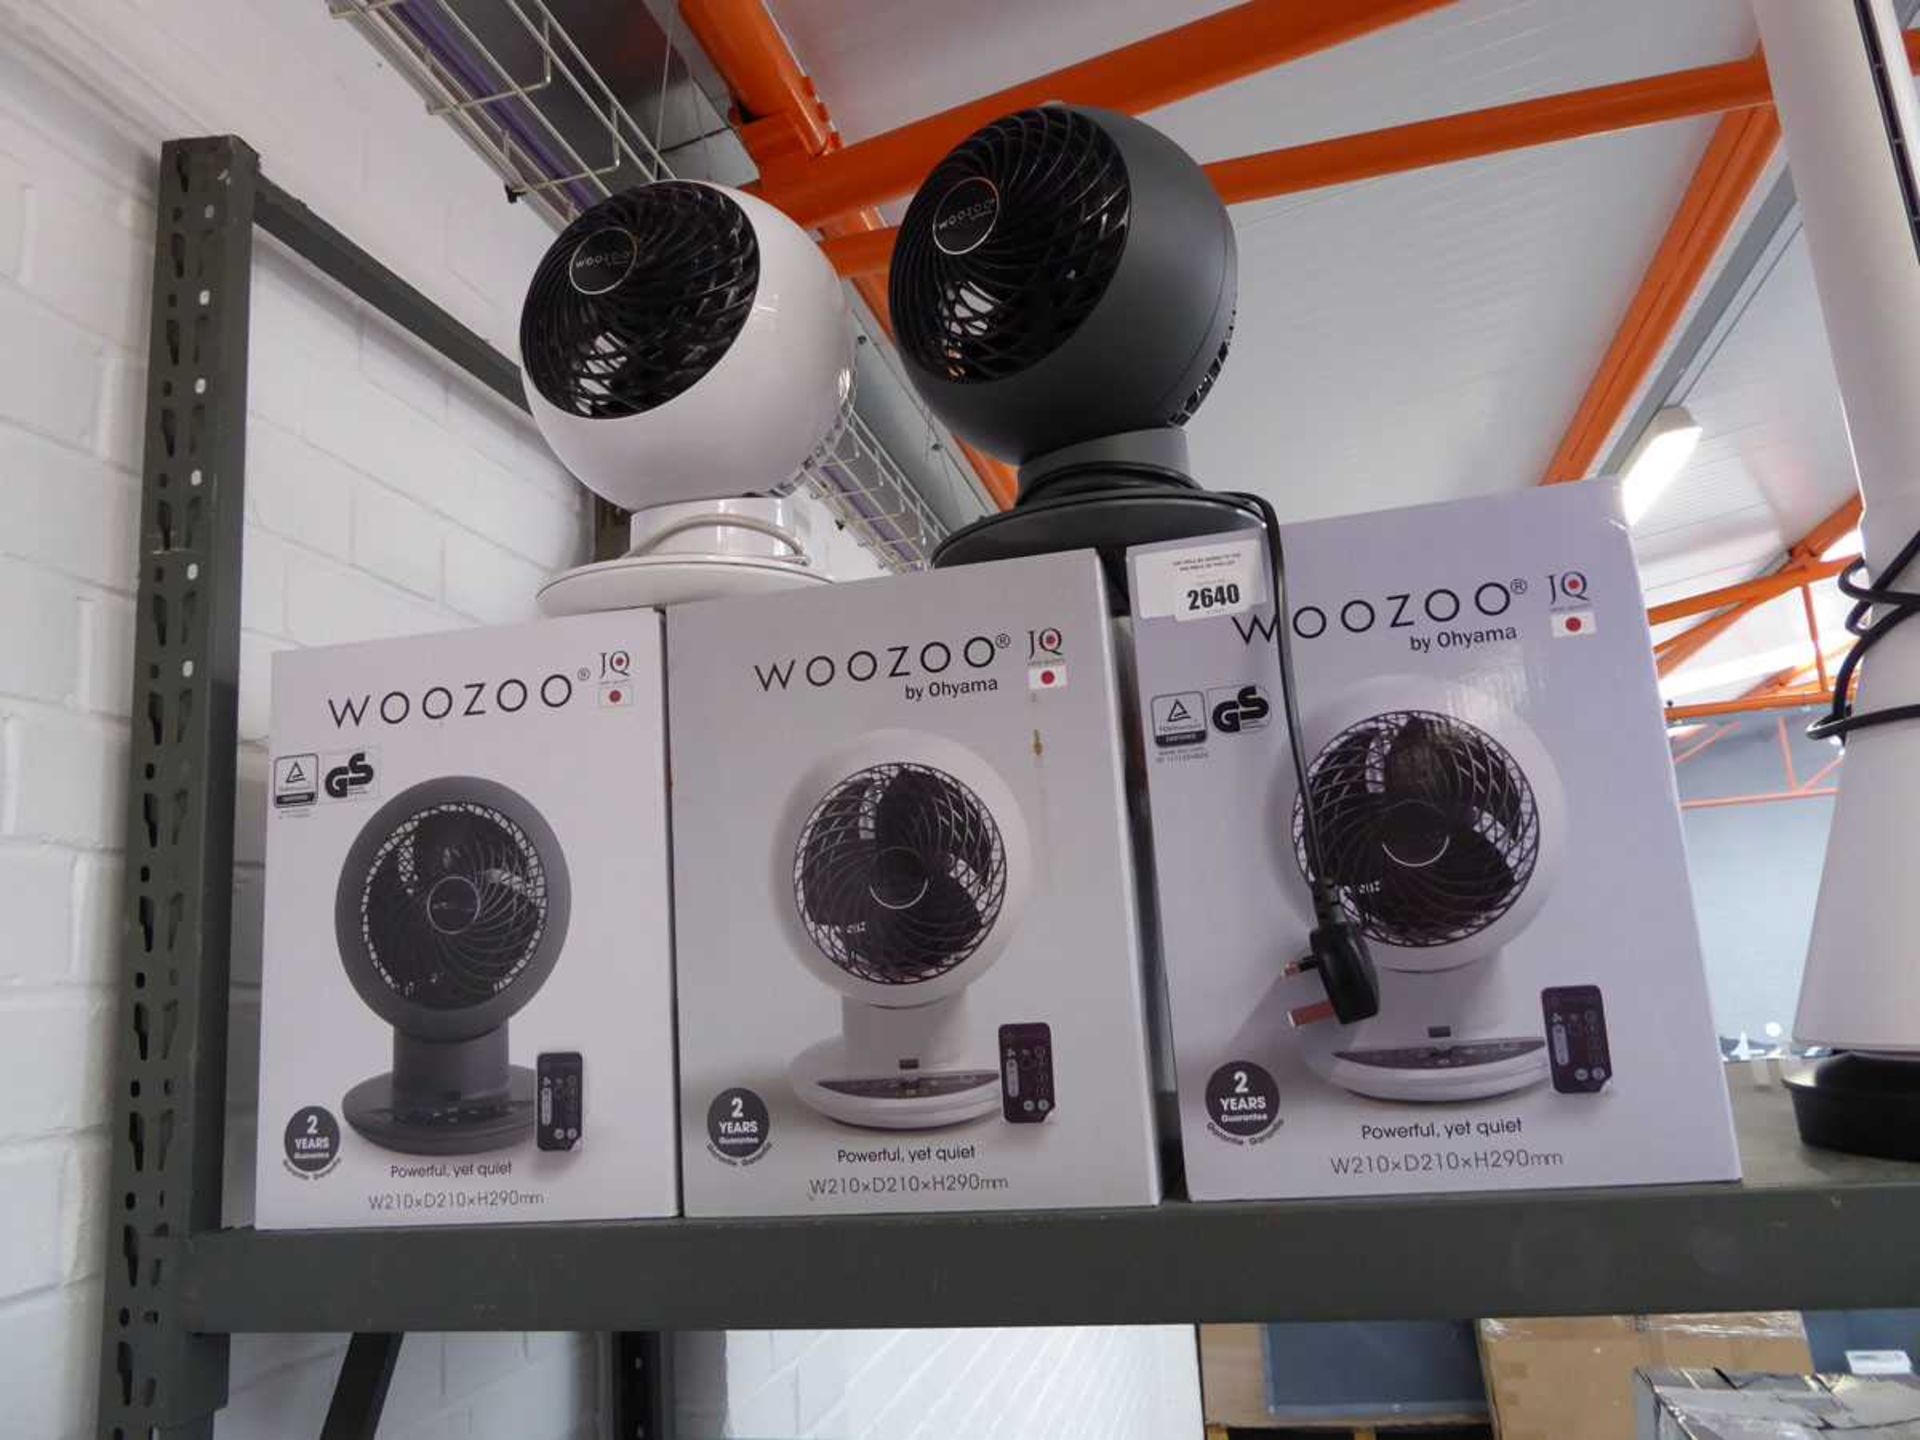 +VAT 3 boxed and 2 unboxed Woozoo fans